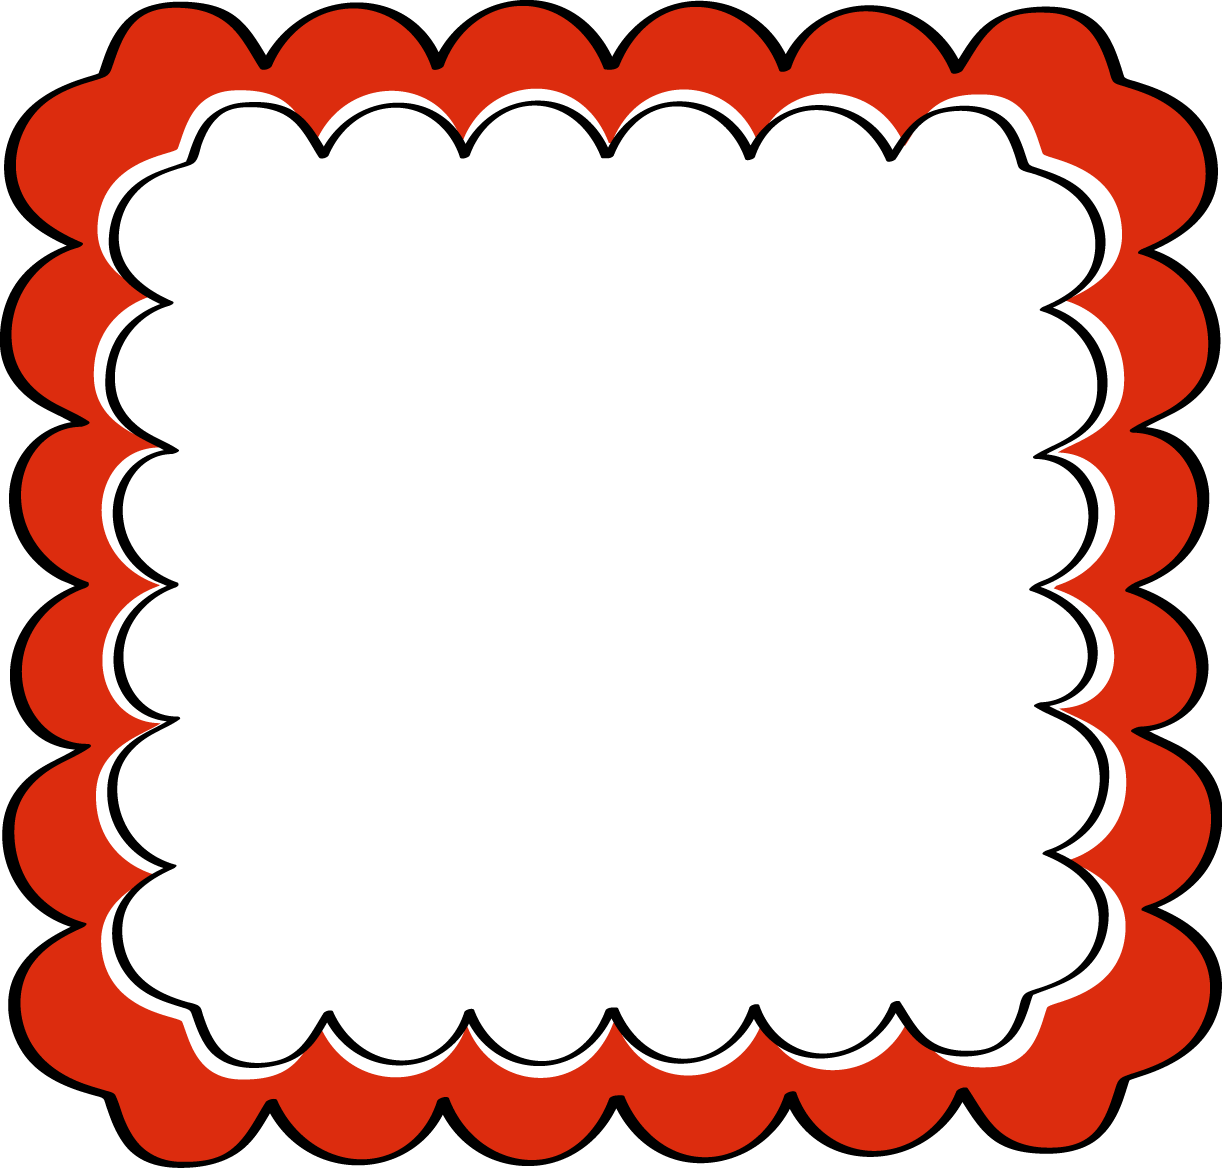 Scrapbook and borders scalloped. Clipart frames red